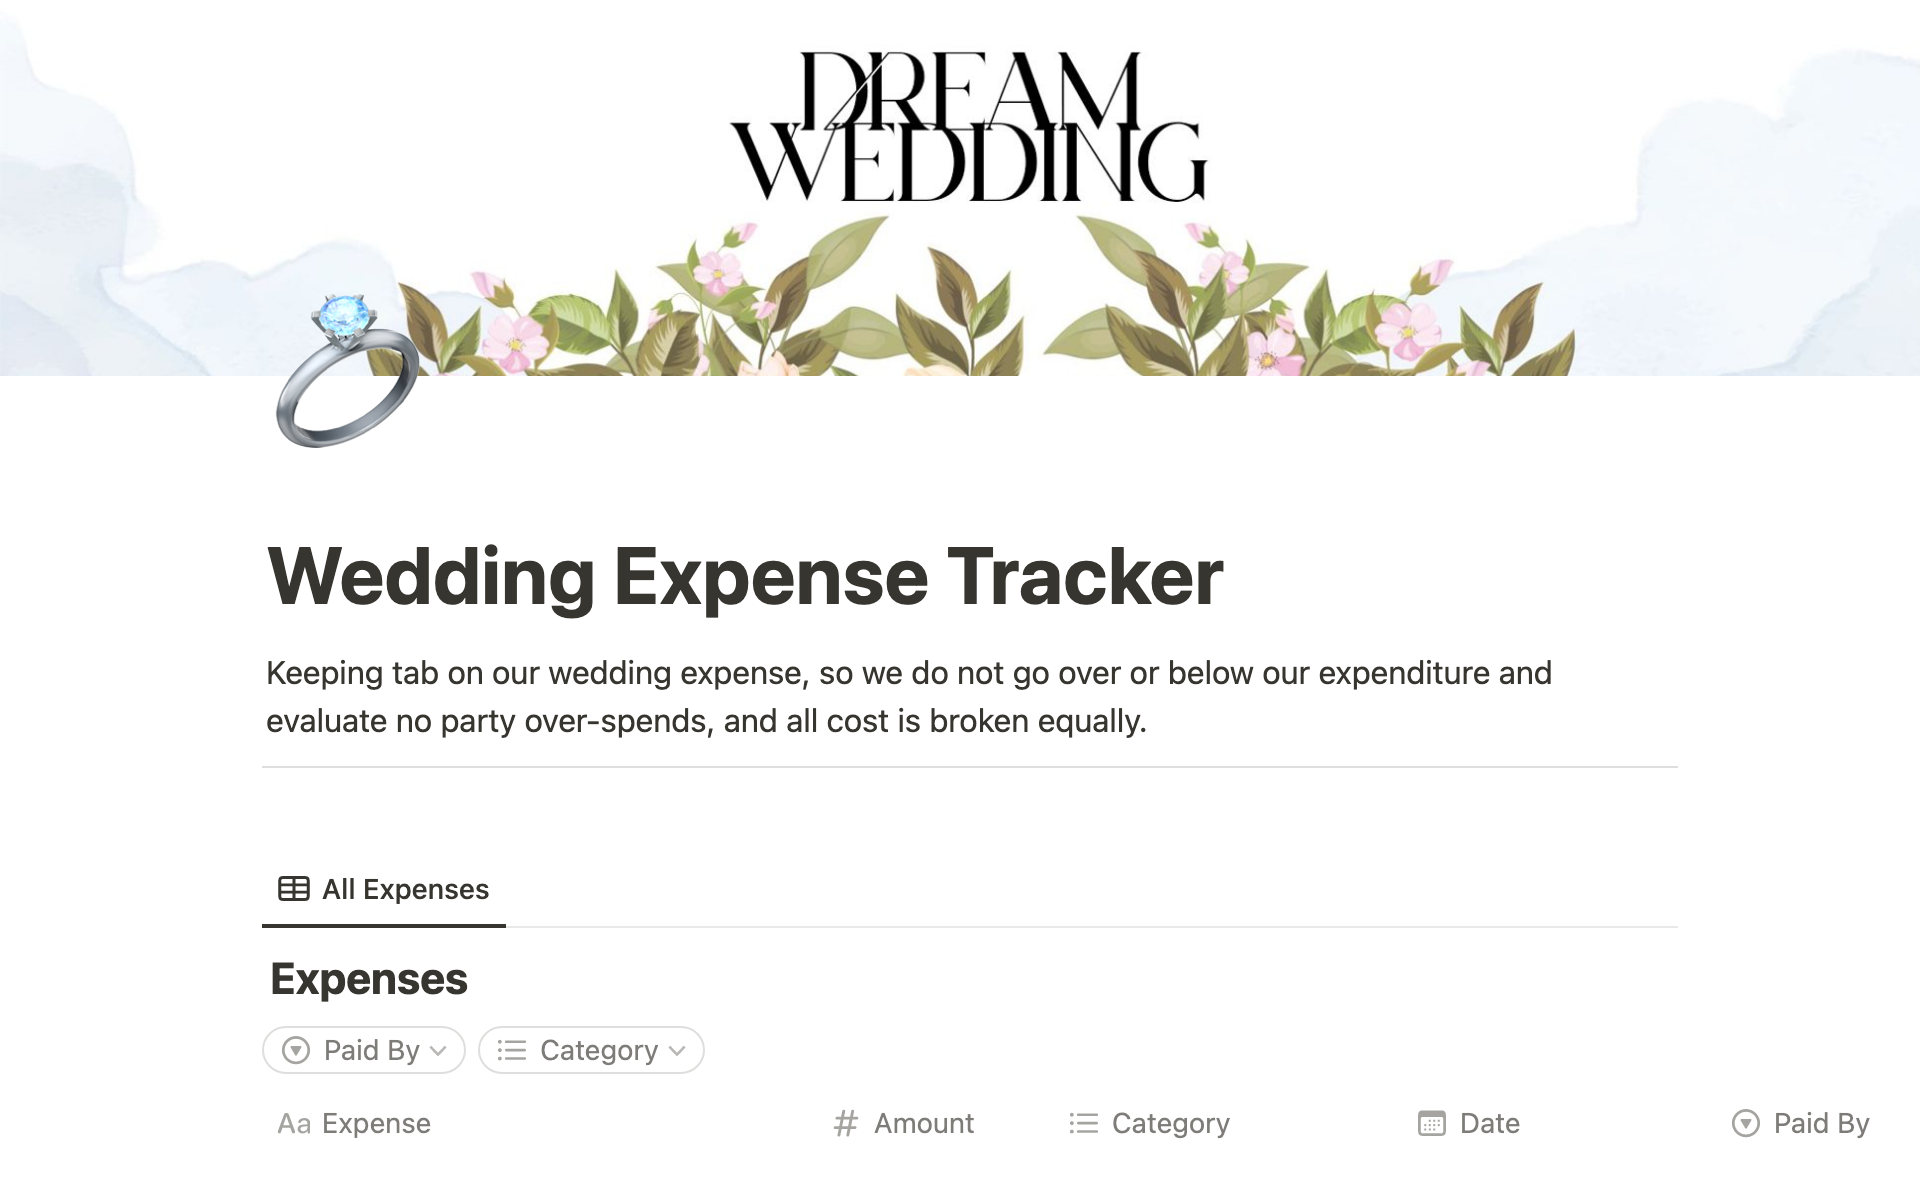 This Notion template is a comprehensive Wedding Expense Calculator that allows you to keep track of all your wedding expenses in one place.